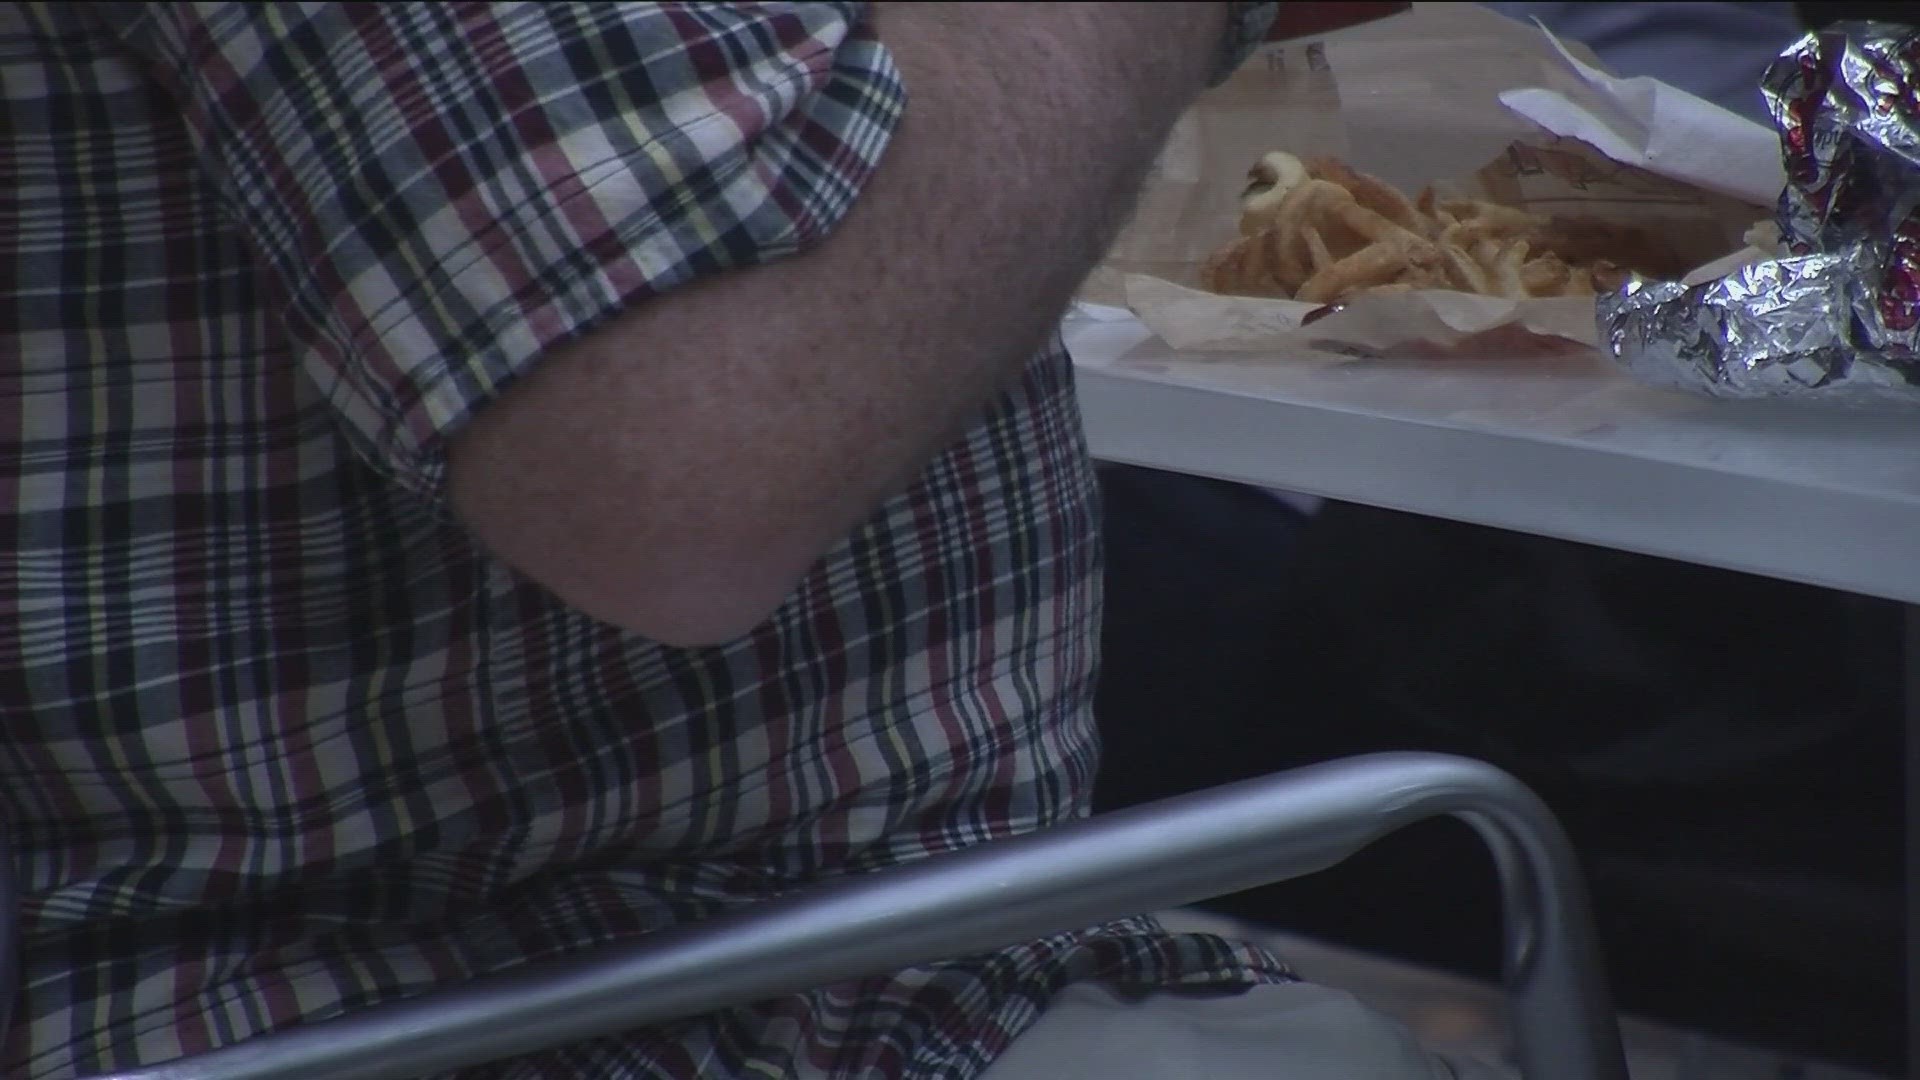 A new study is shedding light on when and why plateaus happen when people try to lose weight.